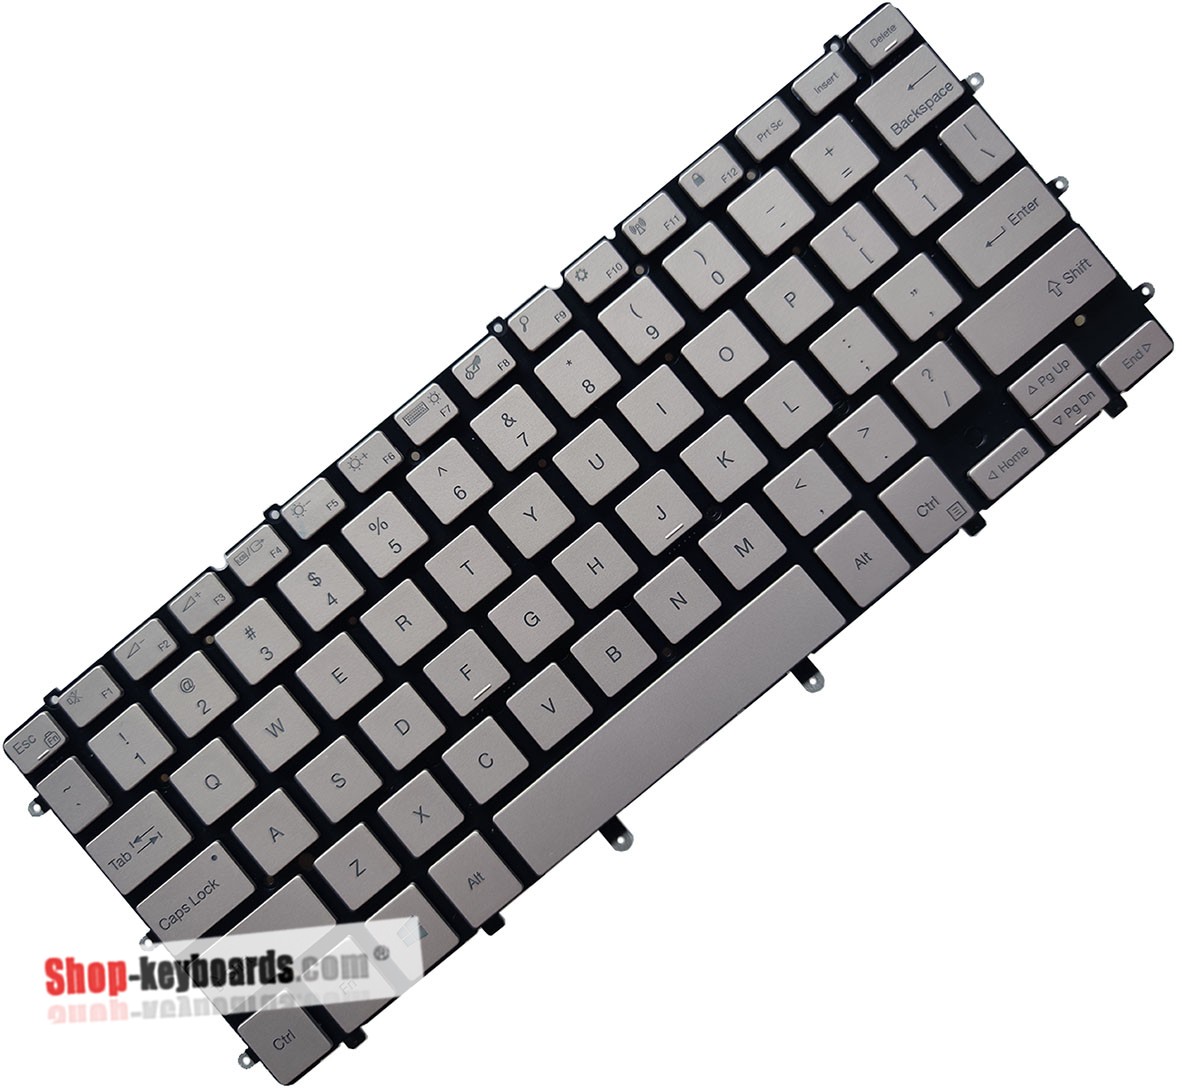 QUANTA AETX7R00020 Keyboard replacement